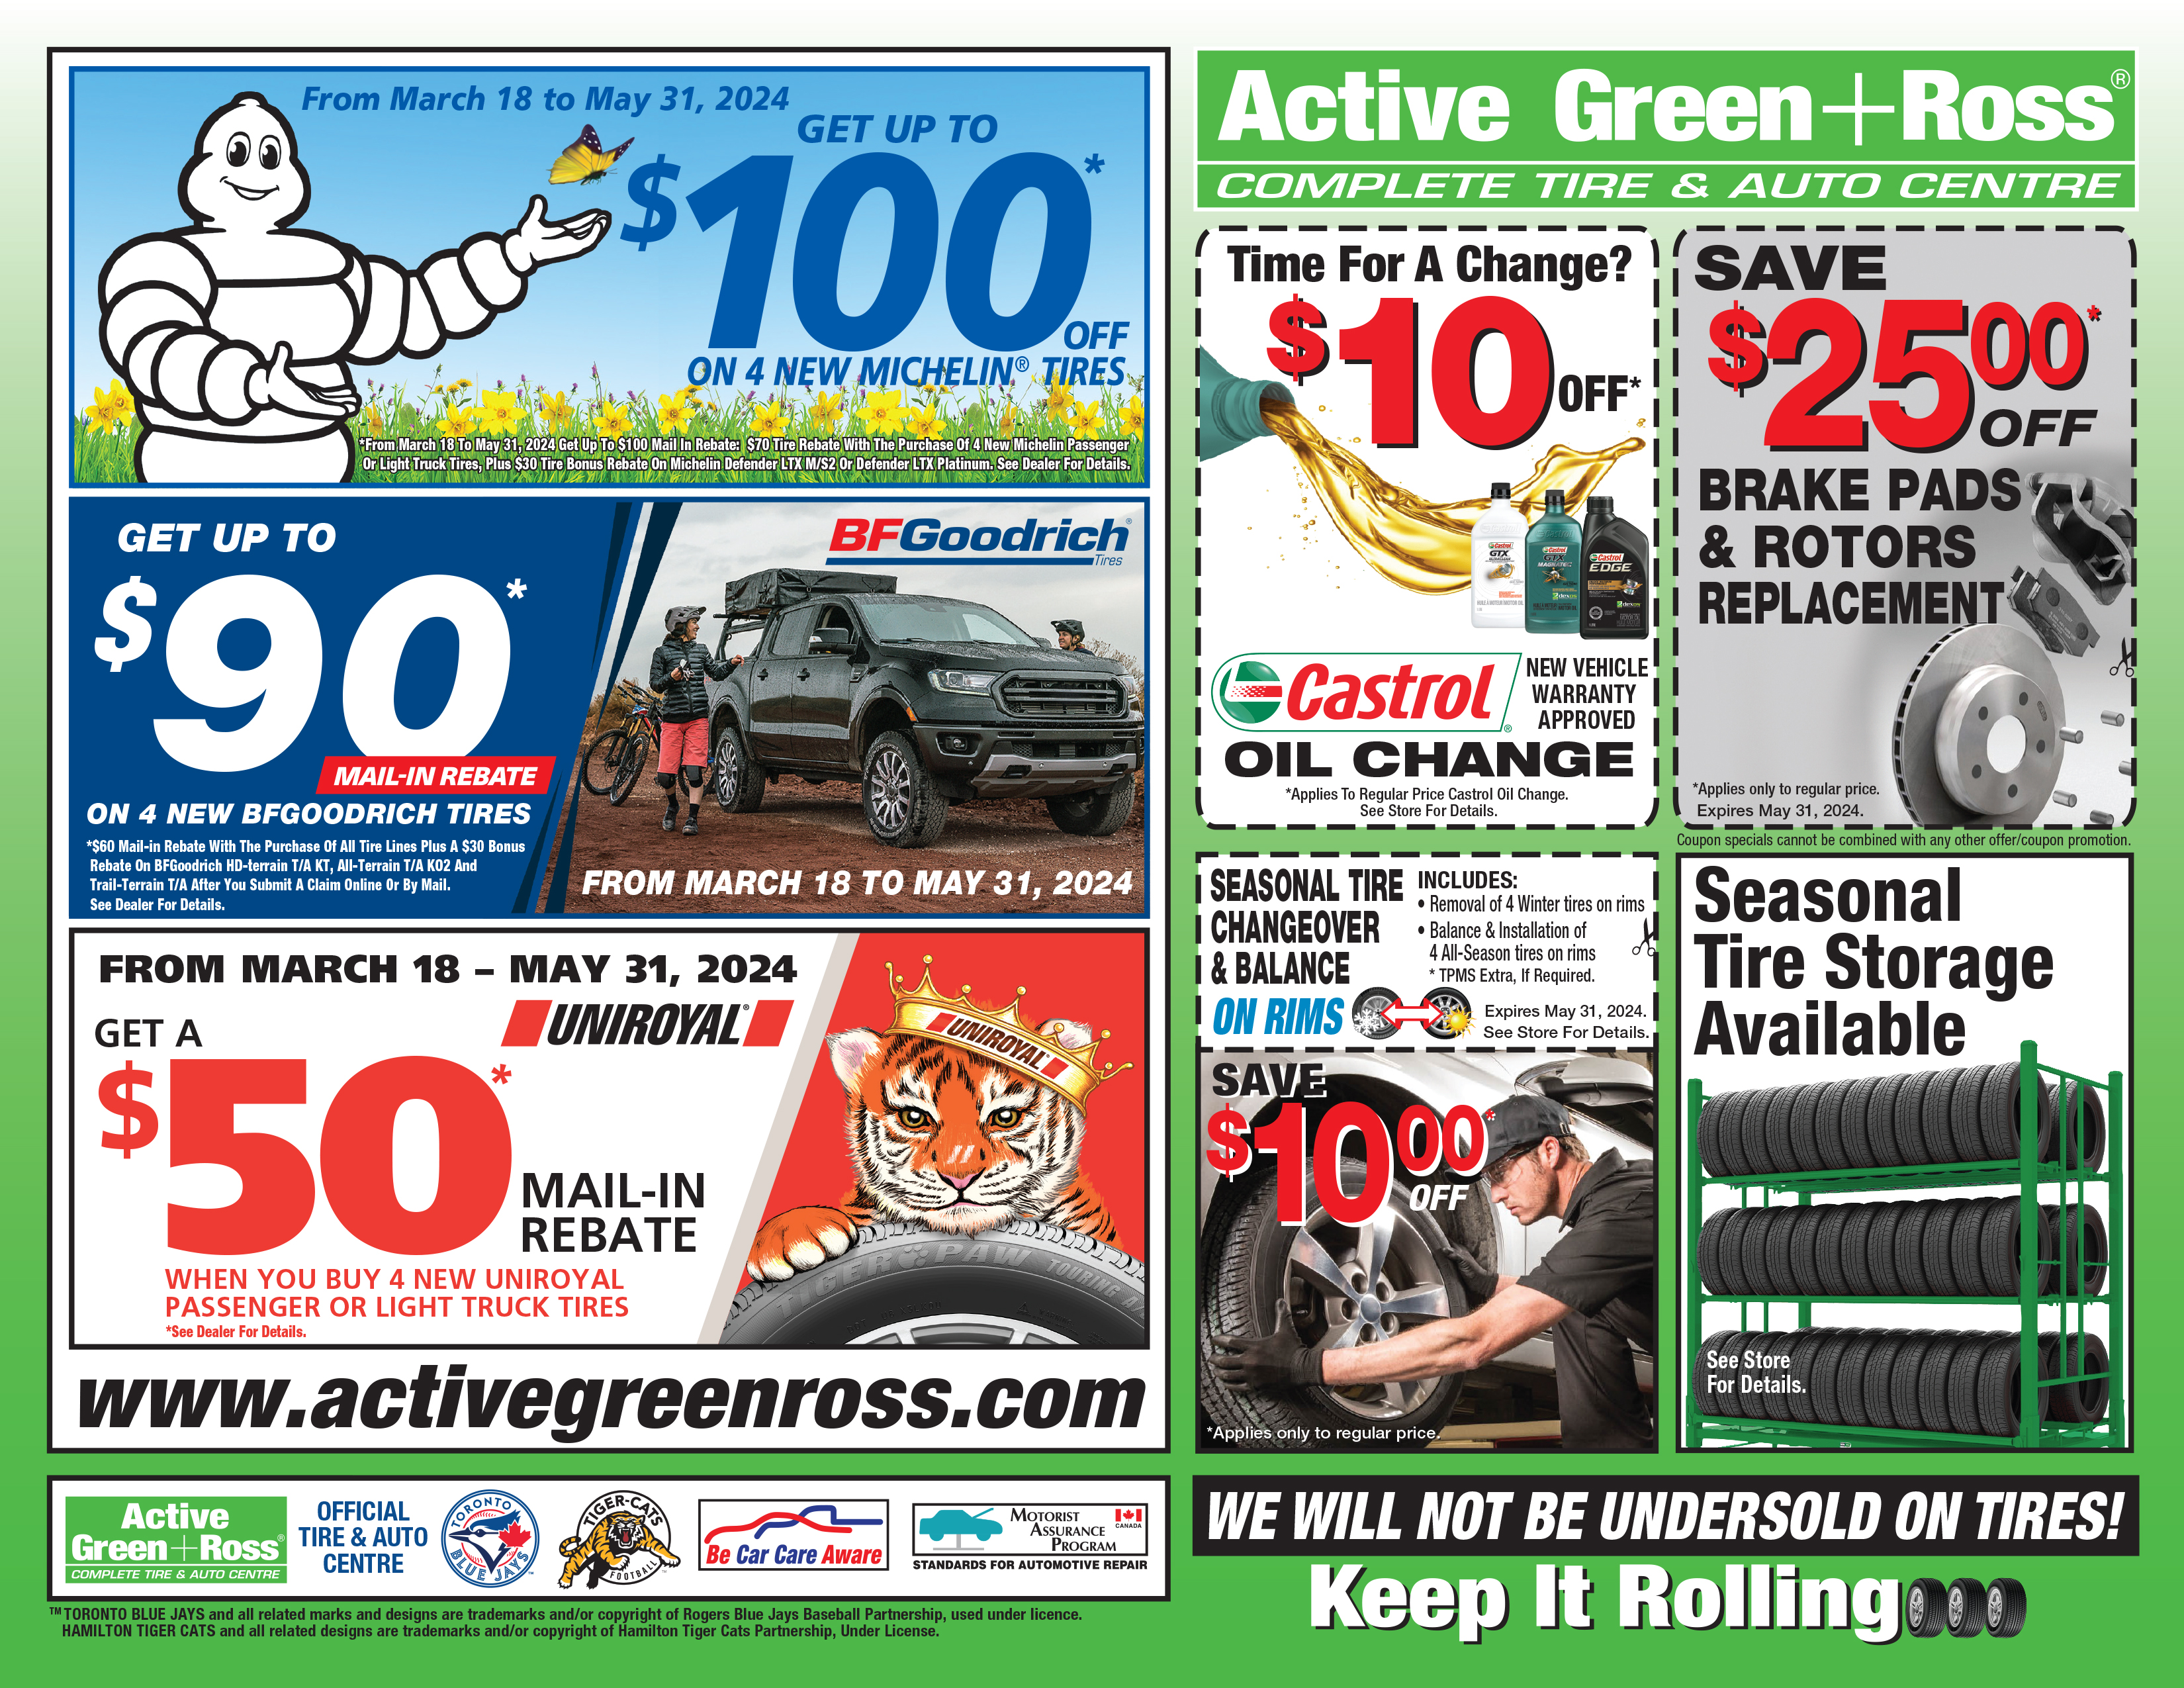 Active Green + Ross Service Offers